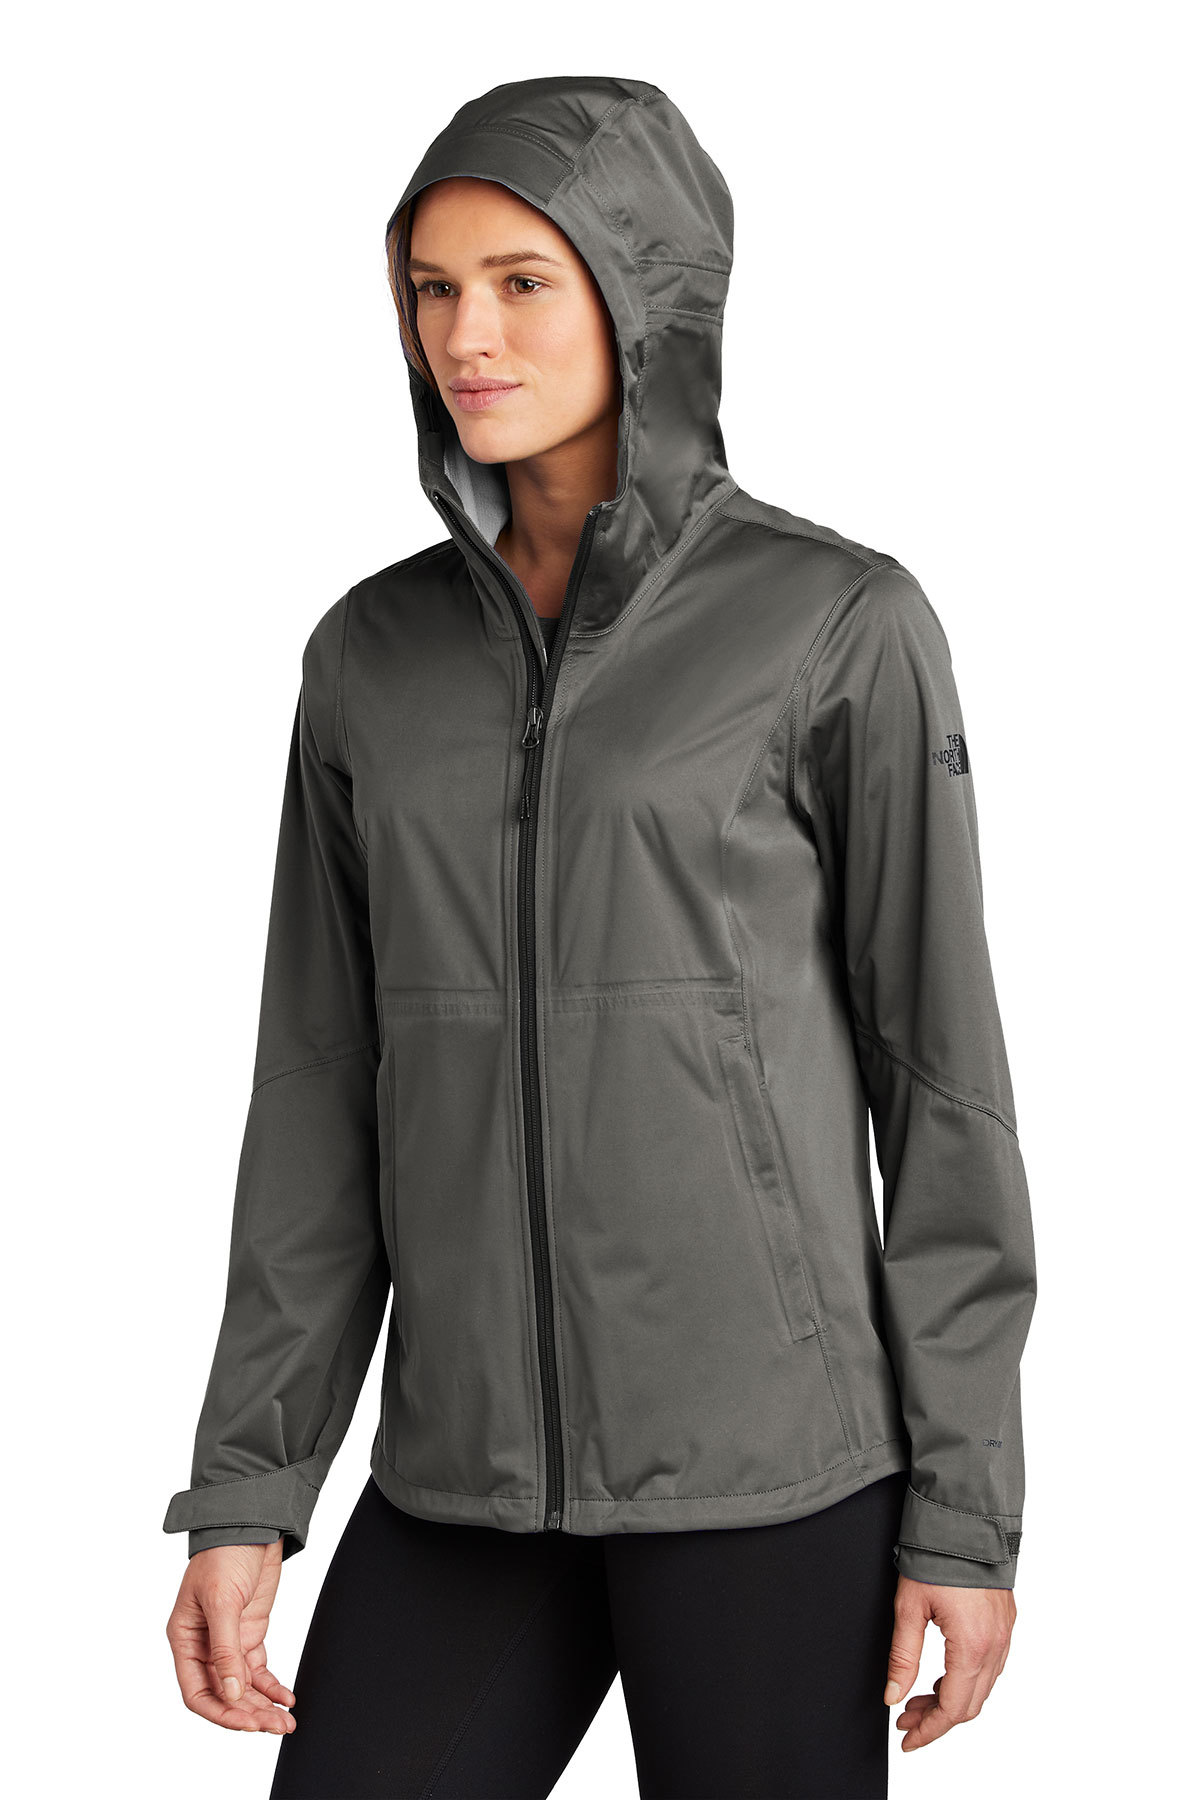 The North Face Ladies All-Weather DryVent Stretch Jacket | Product | SanMar